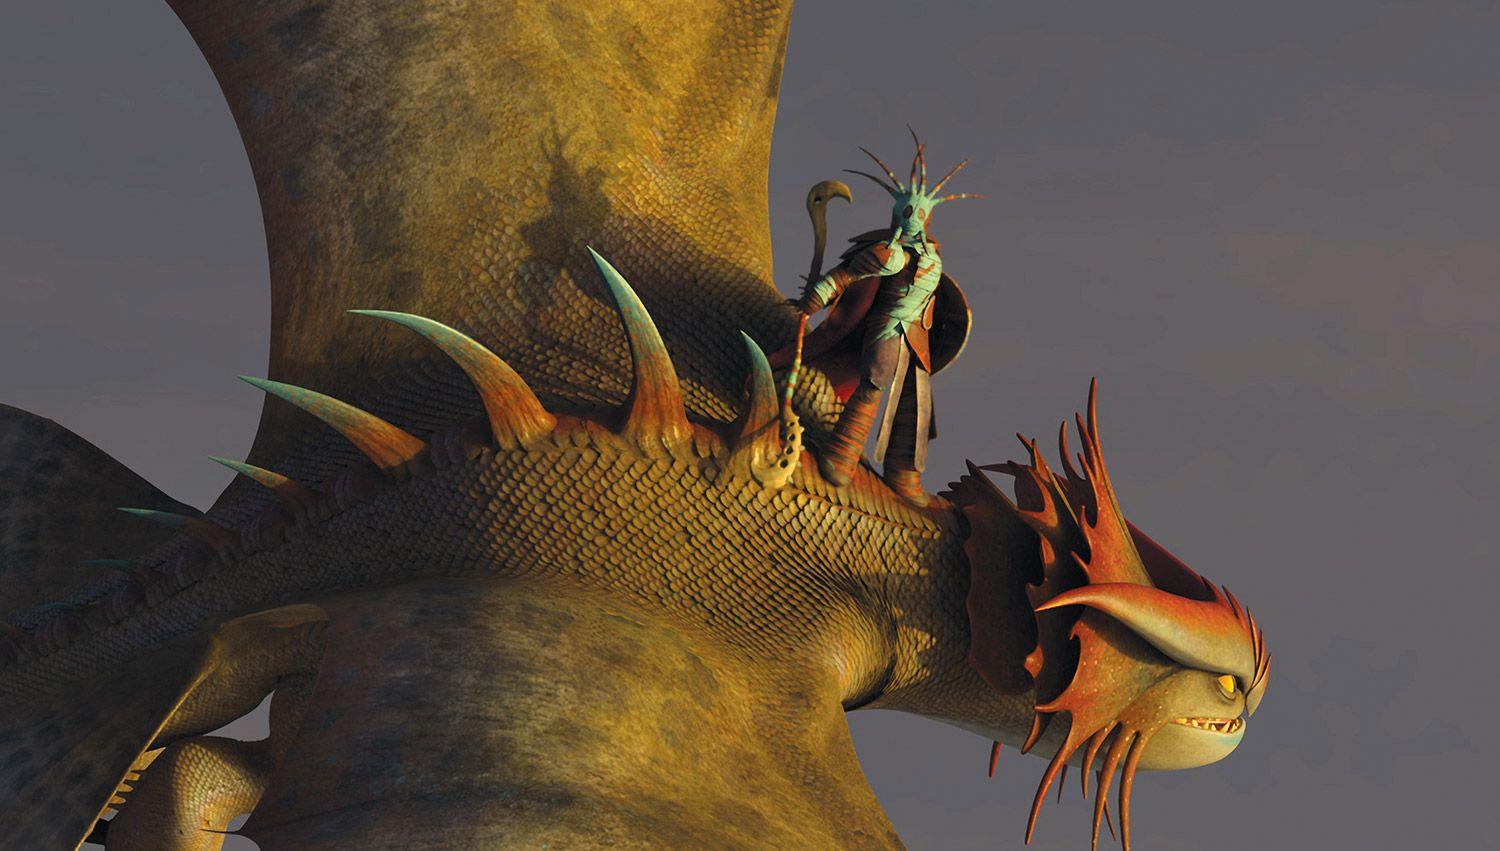 How To Train Your Dragon 3: Release Date Pushed